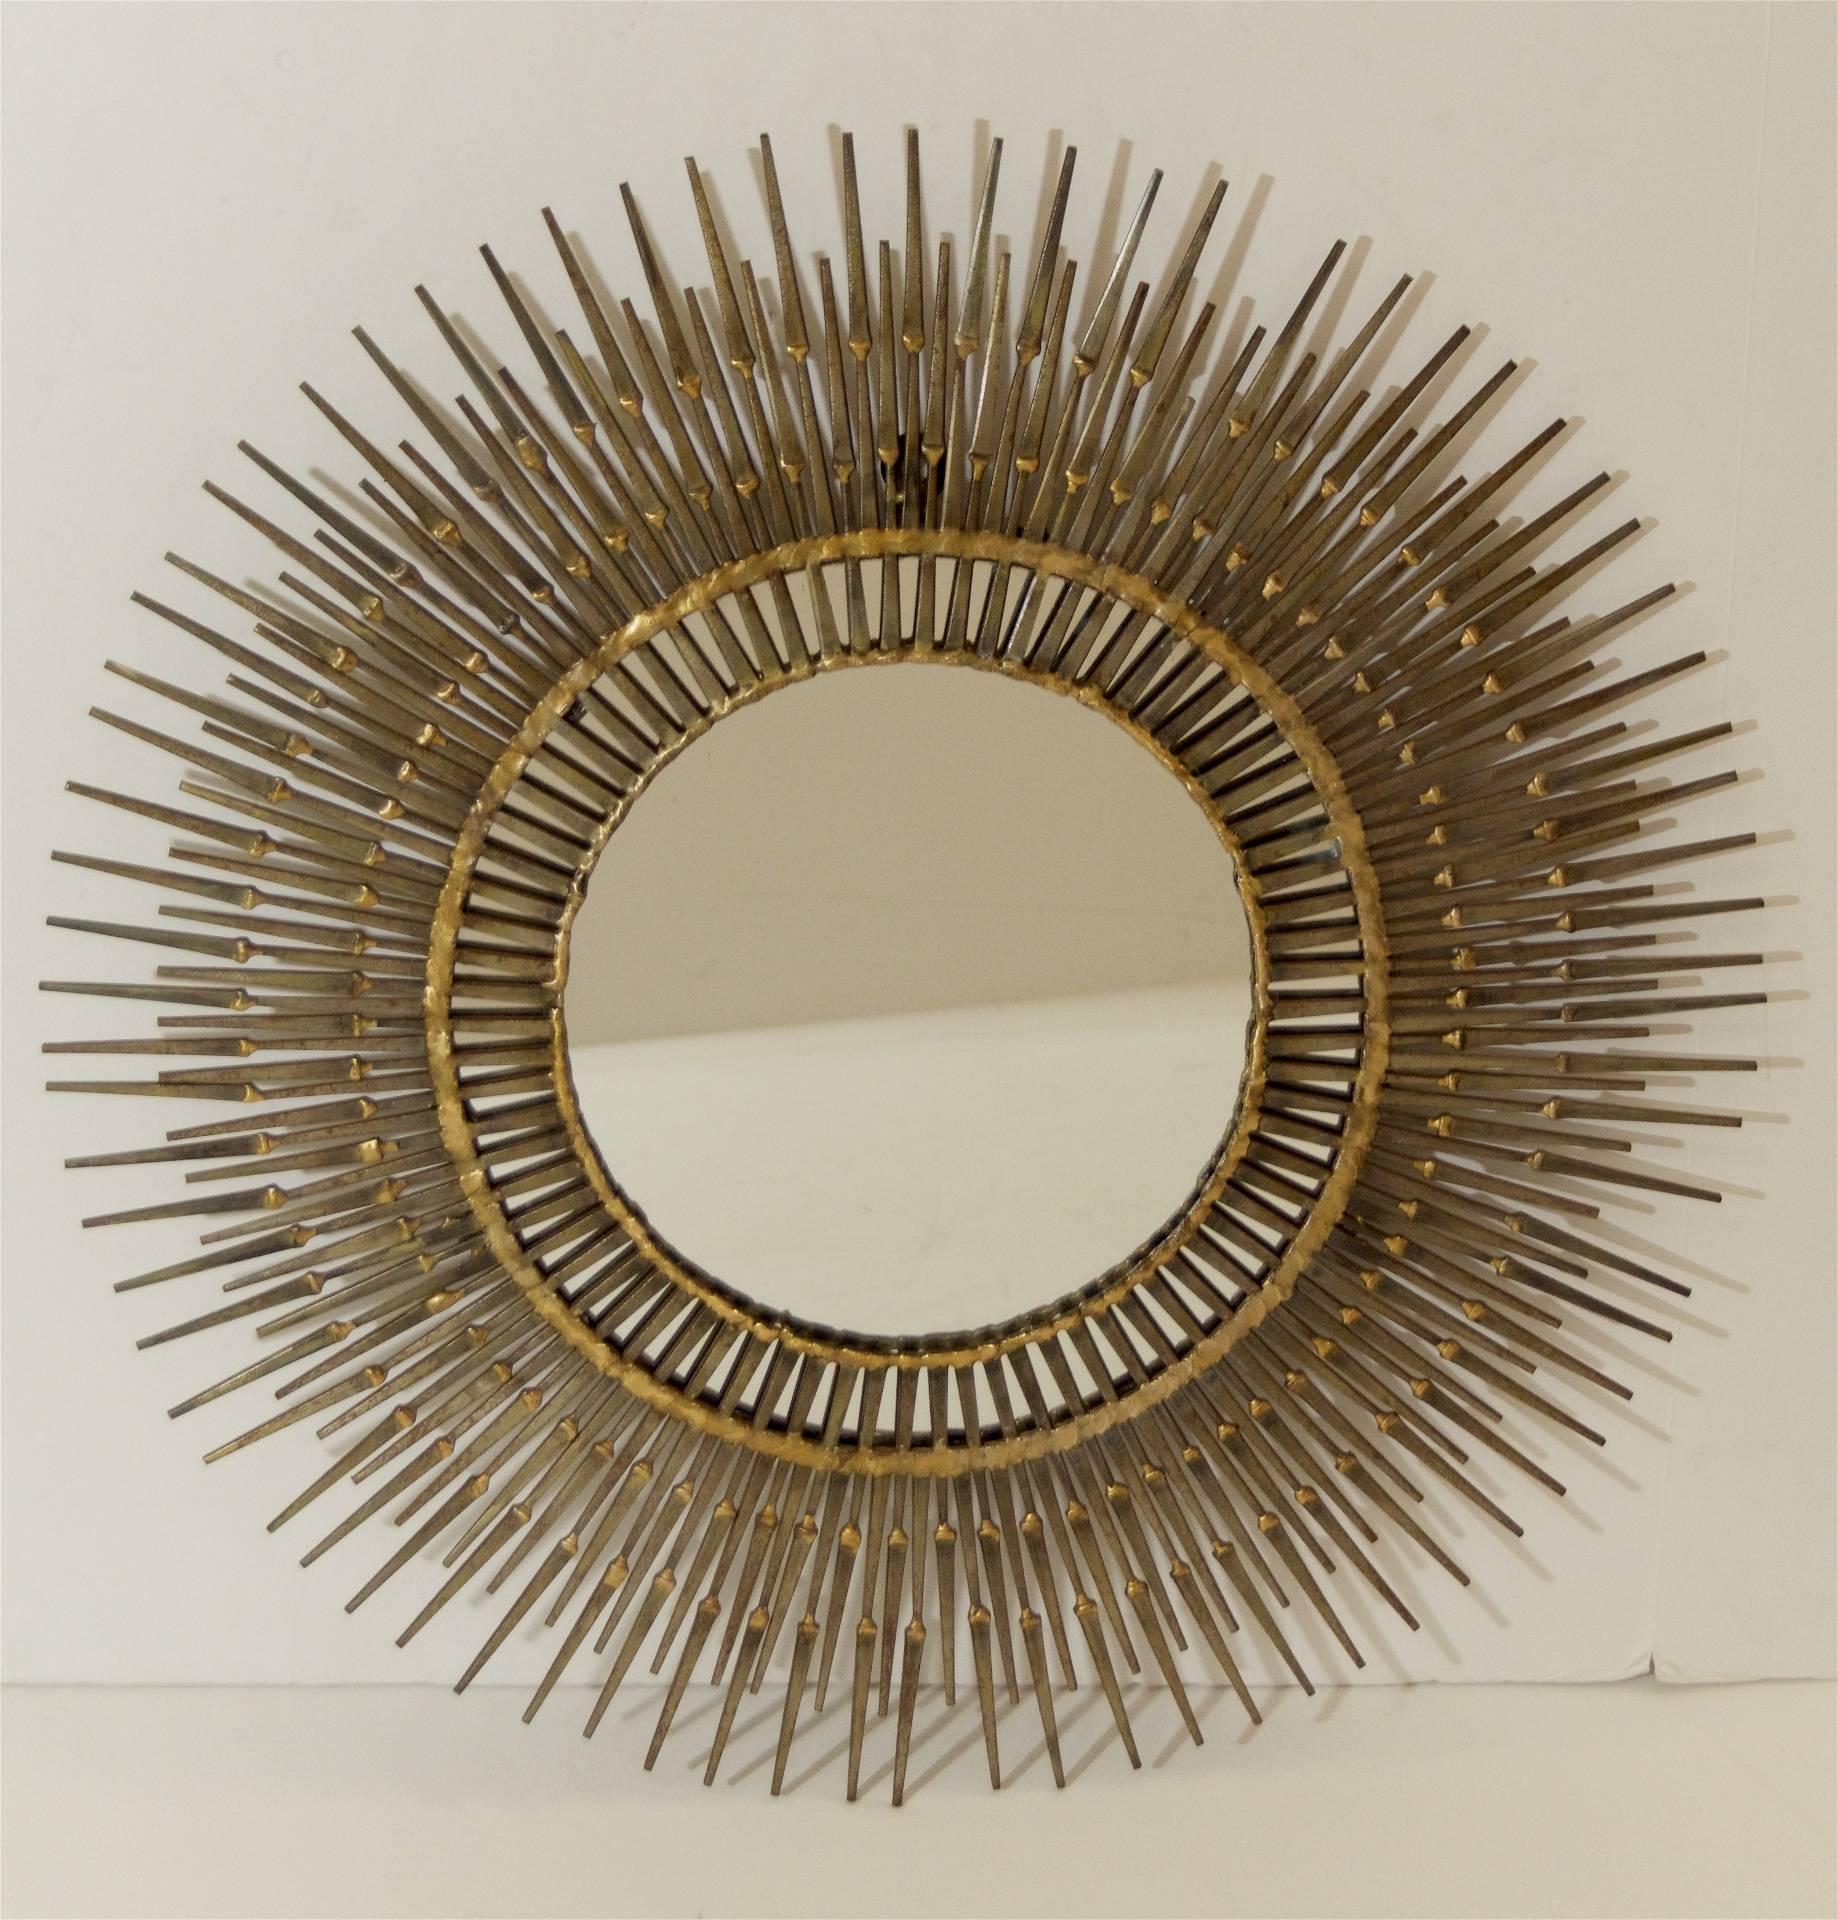 Rare and dramatic Curtis Jere sunburst mirror comprised of welded masonry nails with partial gilding.

Measurement of visible portion of center mirror is 8.5 inches.